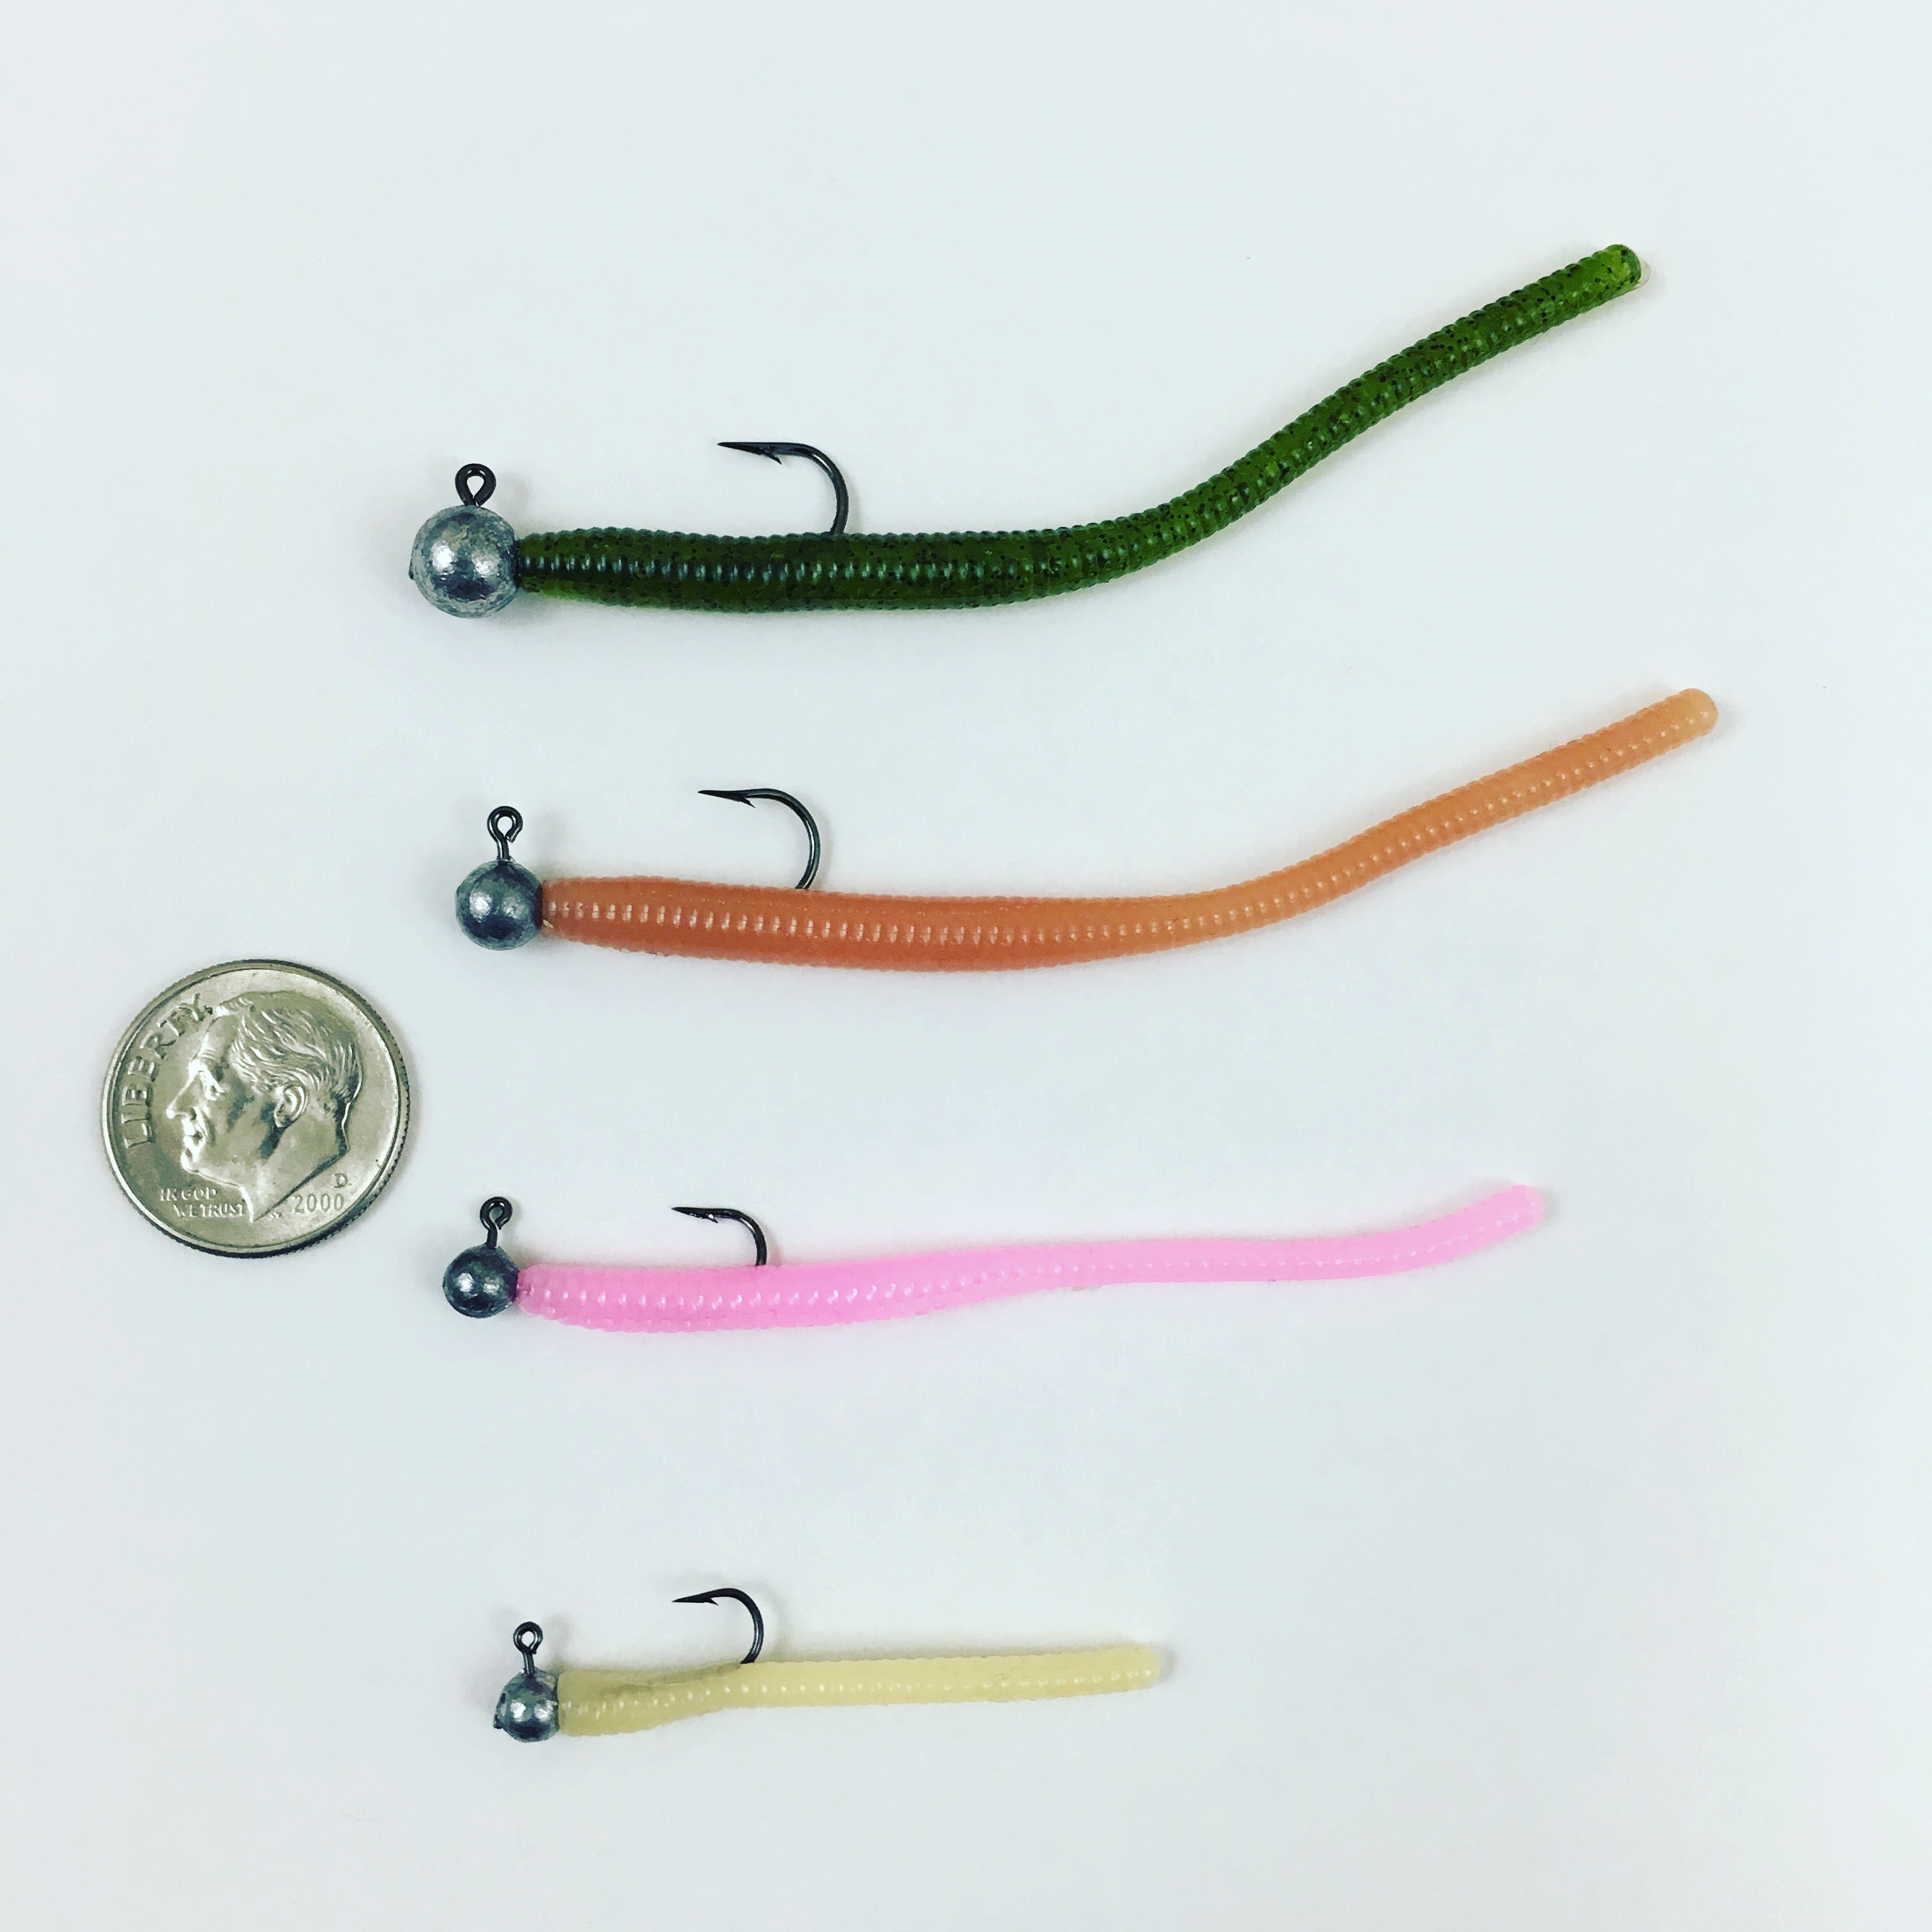 Tackle HD 25-Pack Trout Worms, 3-Inch Fishing Bait with Ribbed Body, Worm  Trout Bait for Lake Fishing, Soft Plastic Fishing Lures for Freshwater,  Fluorescent Red 